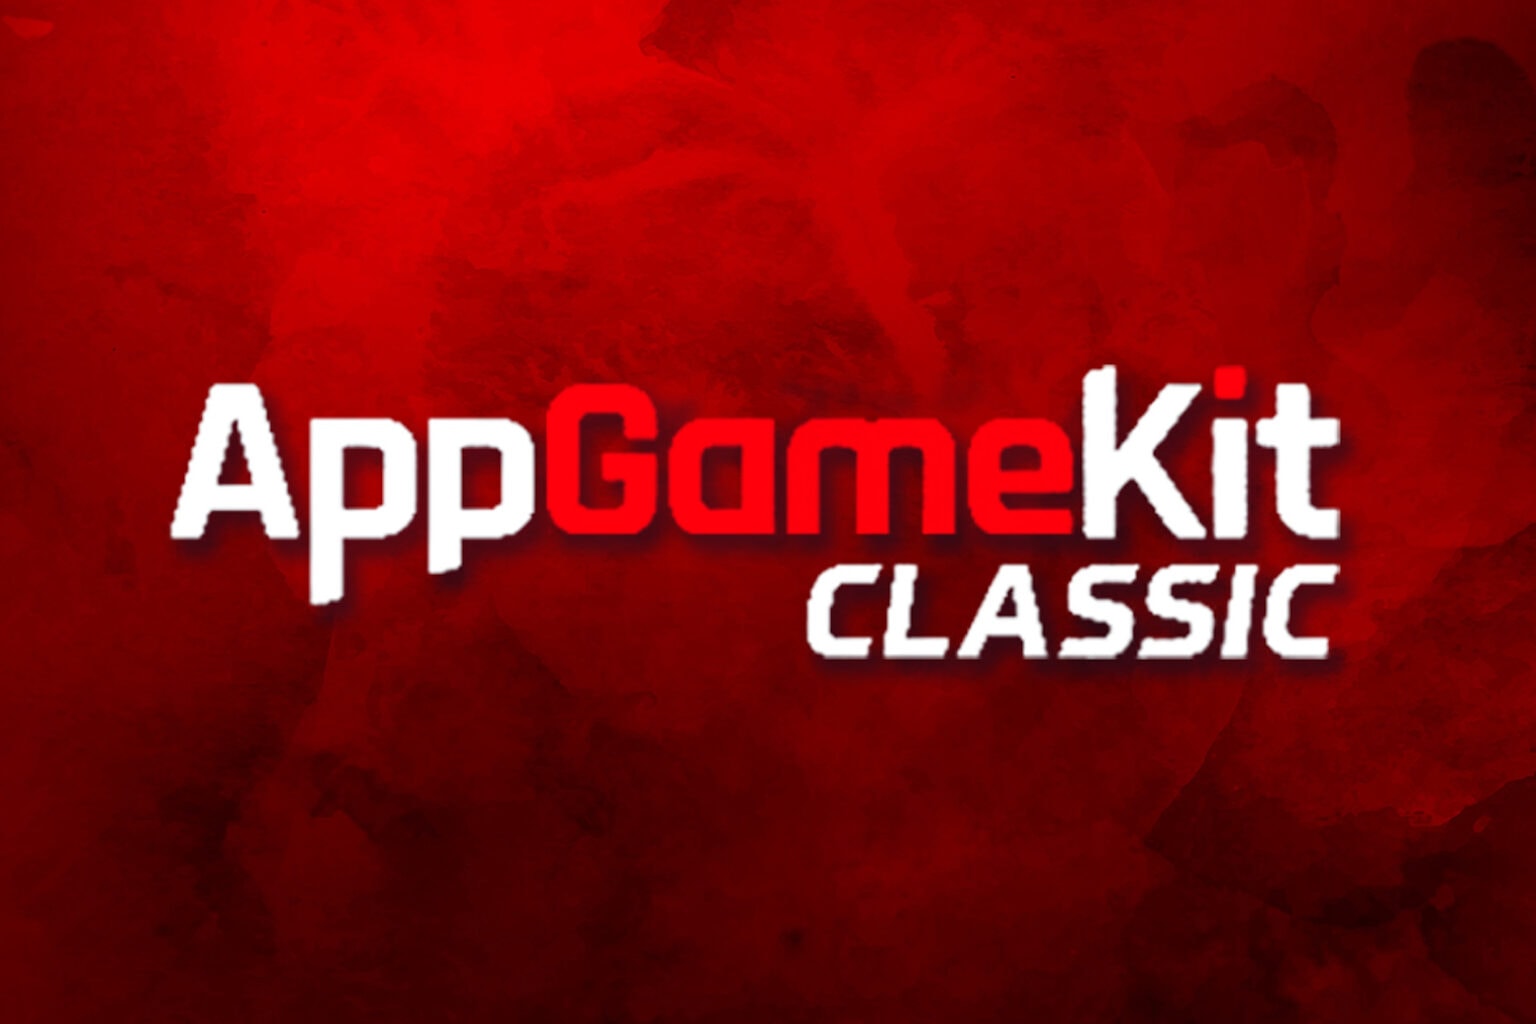 Get 80% off this complete app kit. which allows you to build mobile games as a total beginner.